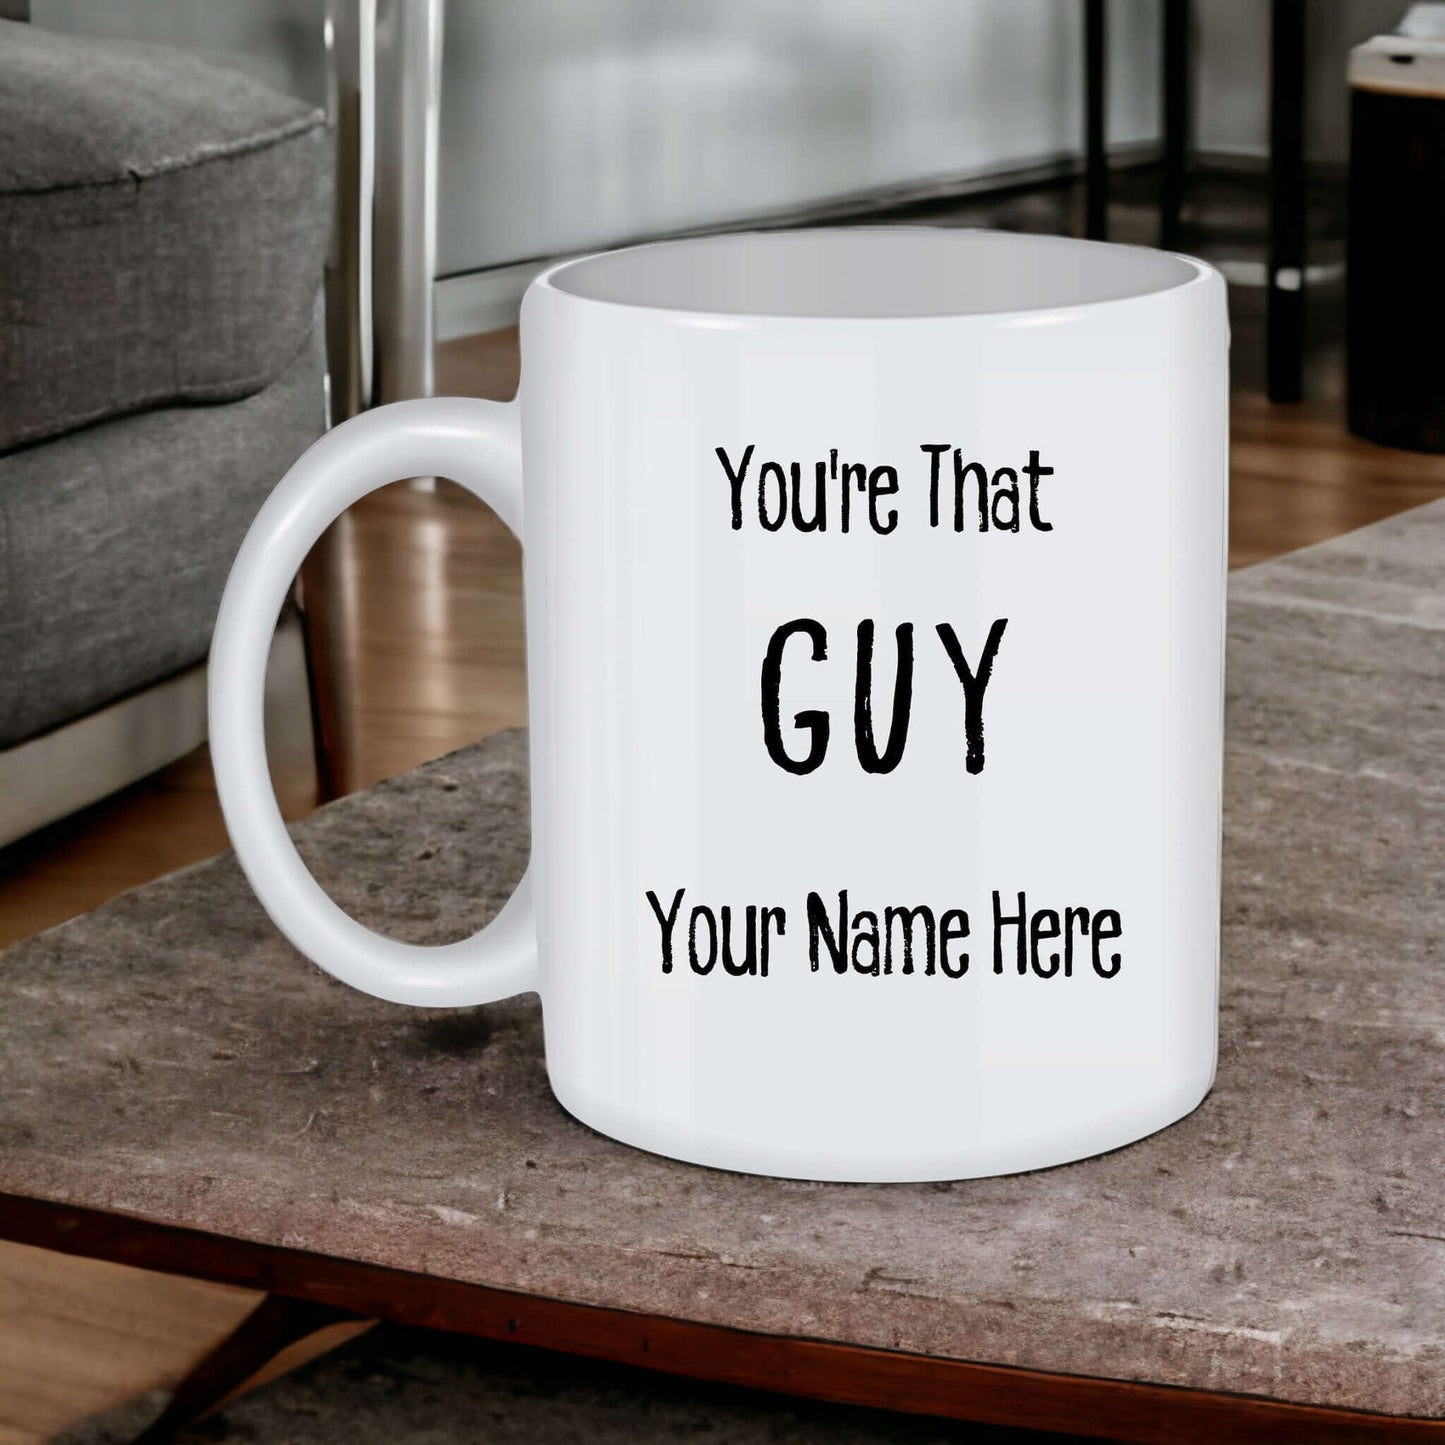 Personalized 'You're That Guy' Inspirational Coffee Mug, Thoughtful Gift for Him, Custom Name, Motivational Saying